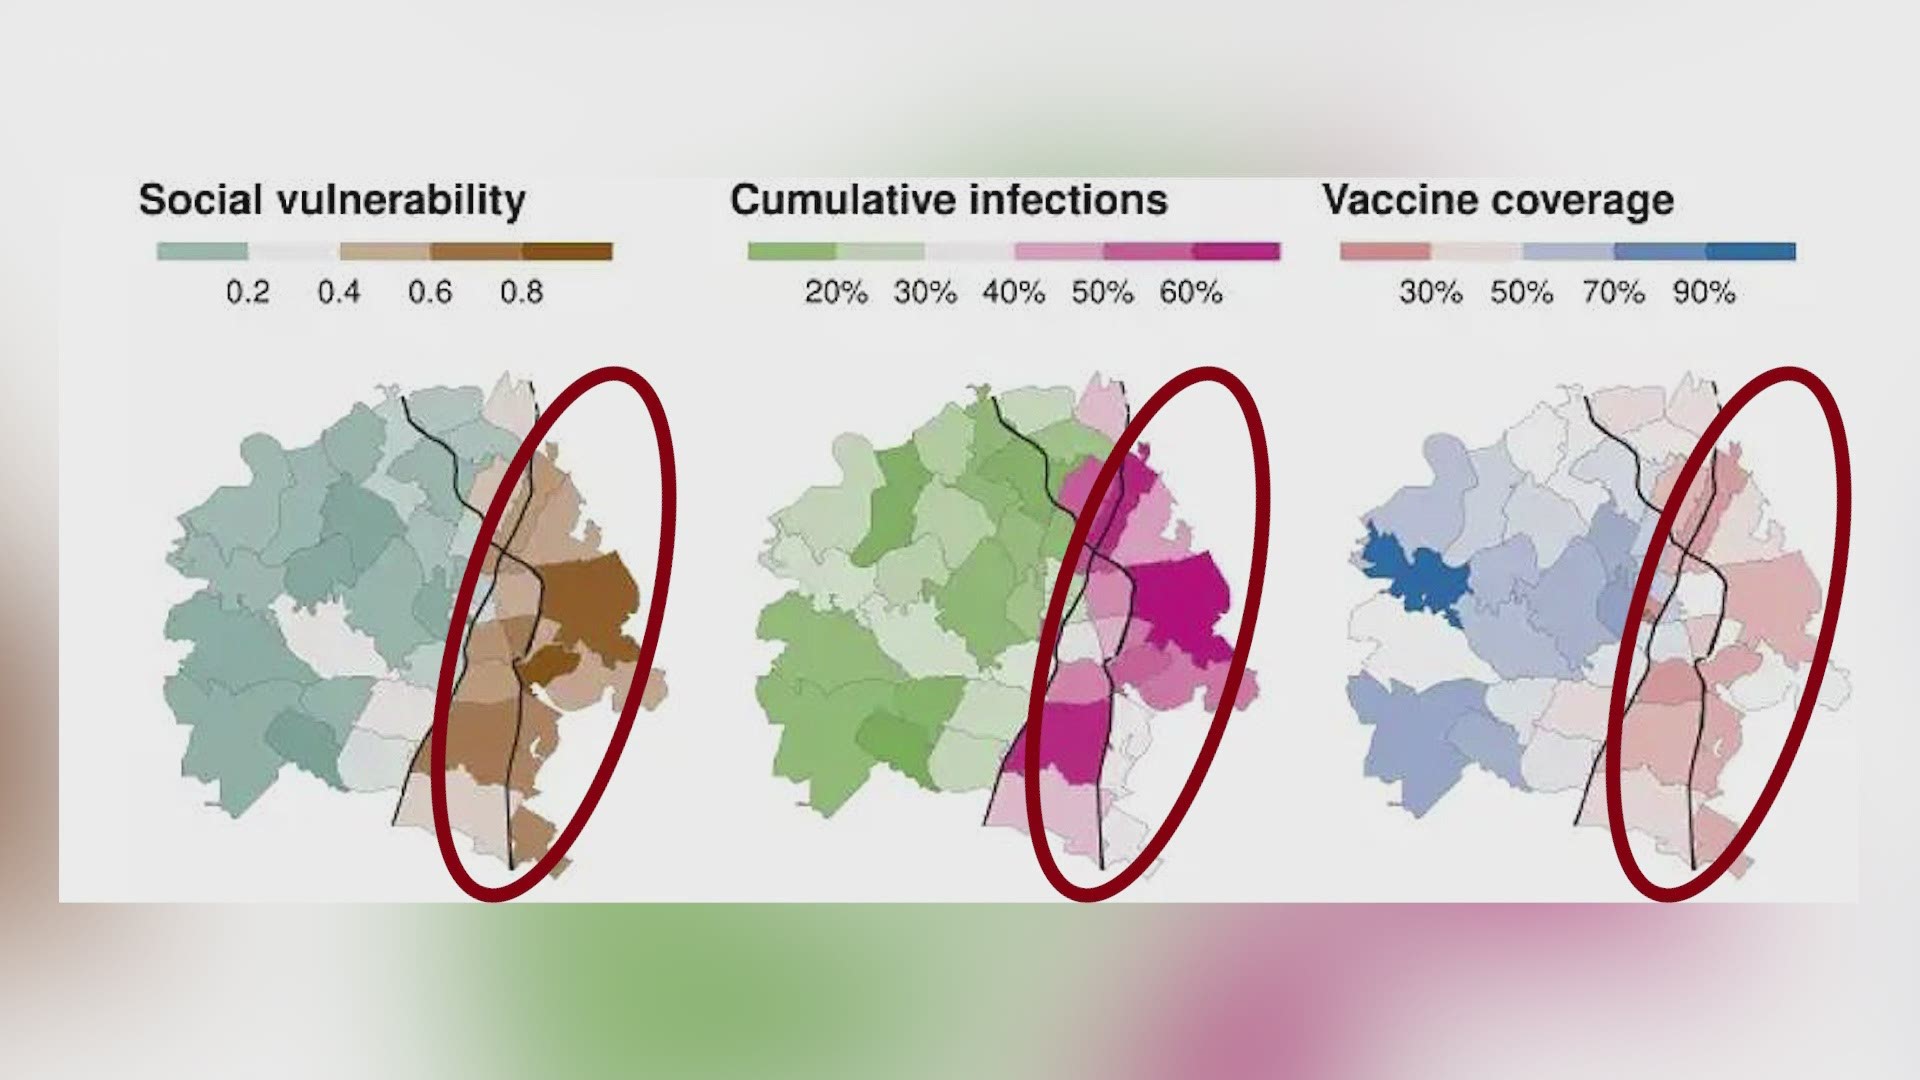 New research shows a stark difference in vaccination rates east and west of Interstate 35.